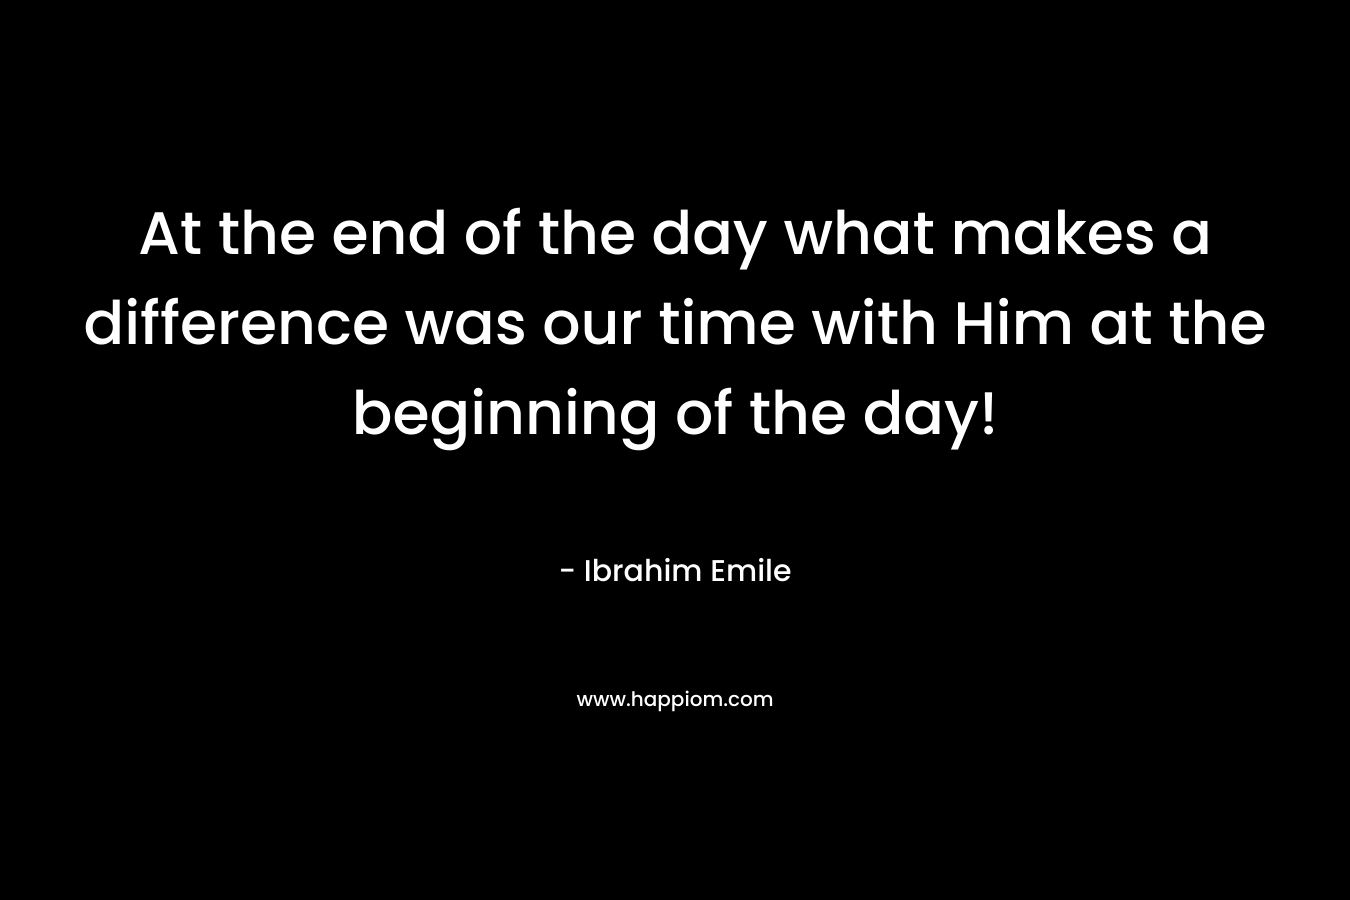 At the end of the day what makes a difference was our time with Him at the beginning of the day!